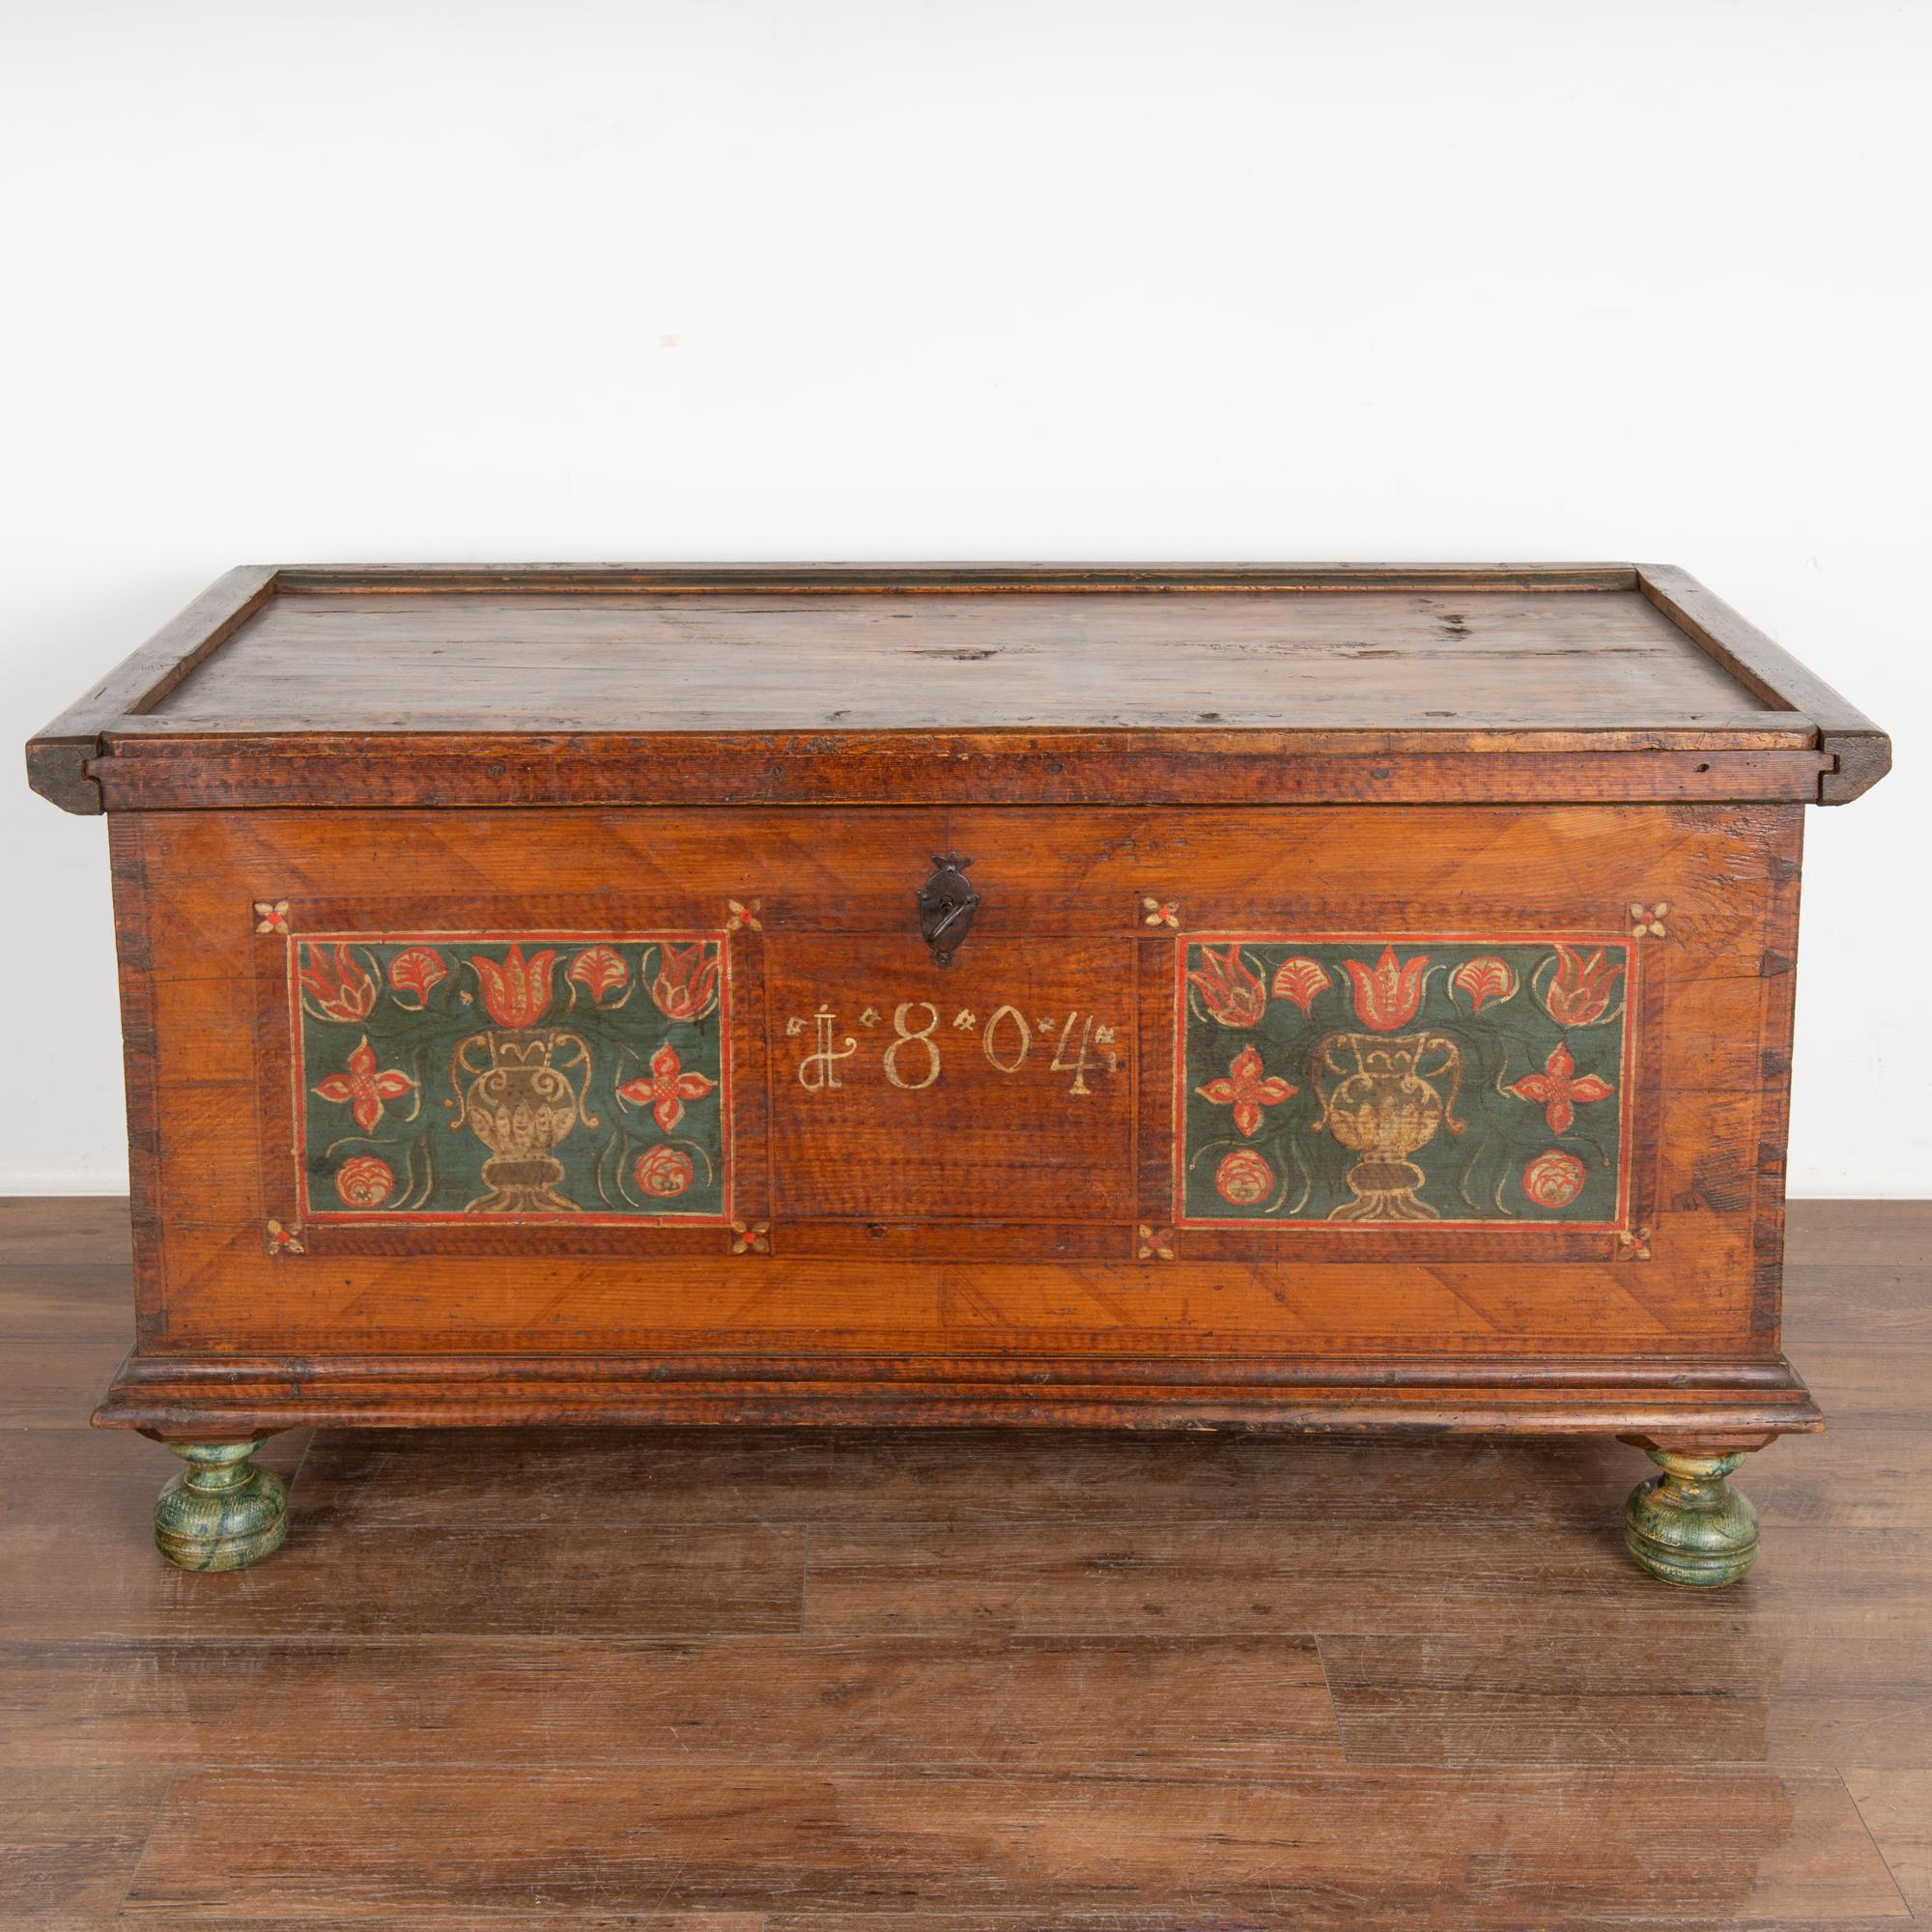 Austrian Original Painted Flat Top Trunk With Flowers, Austria dated 1804 For Sale